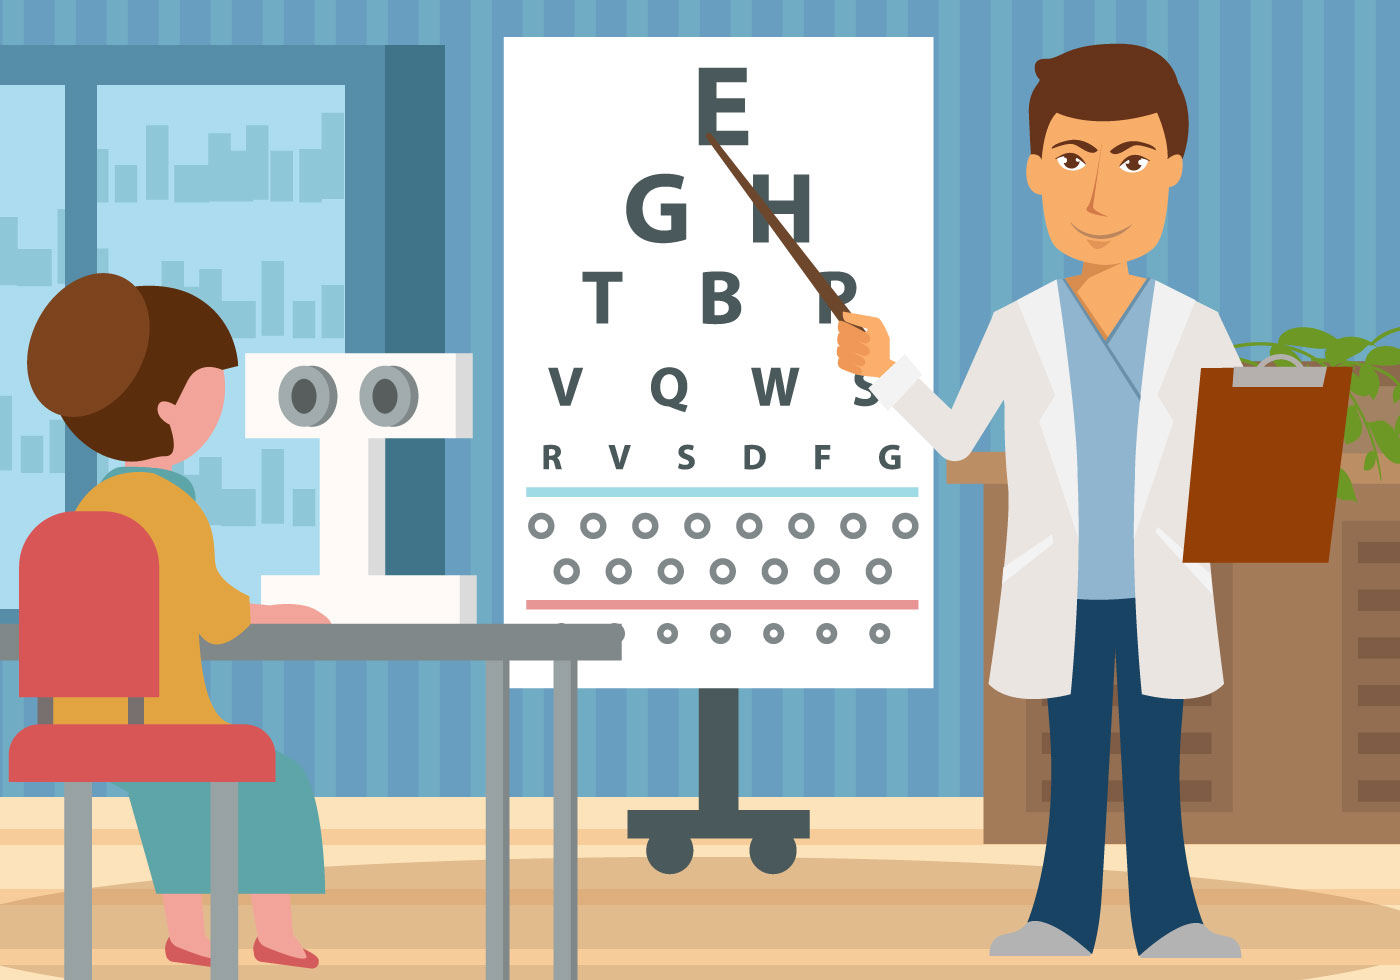 Download the Eye Test Vector 151419